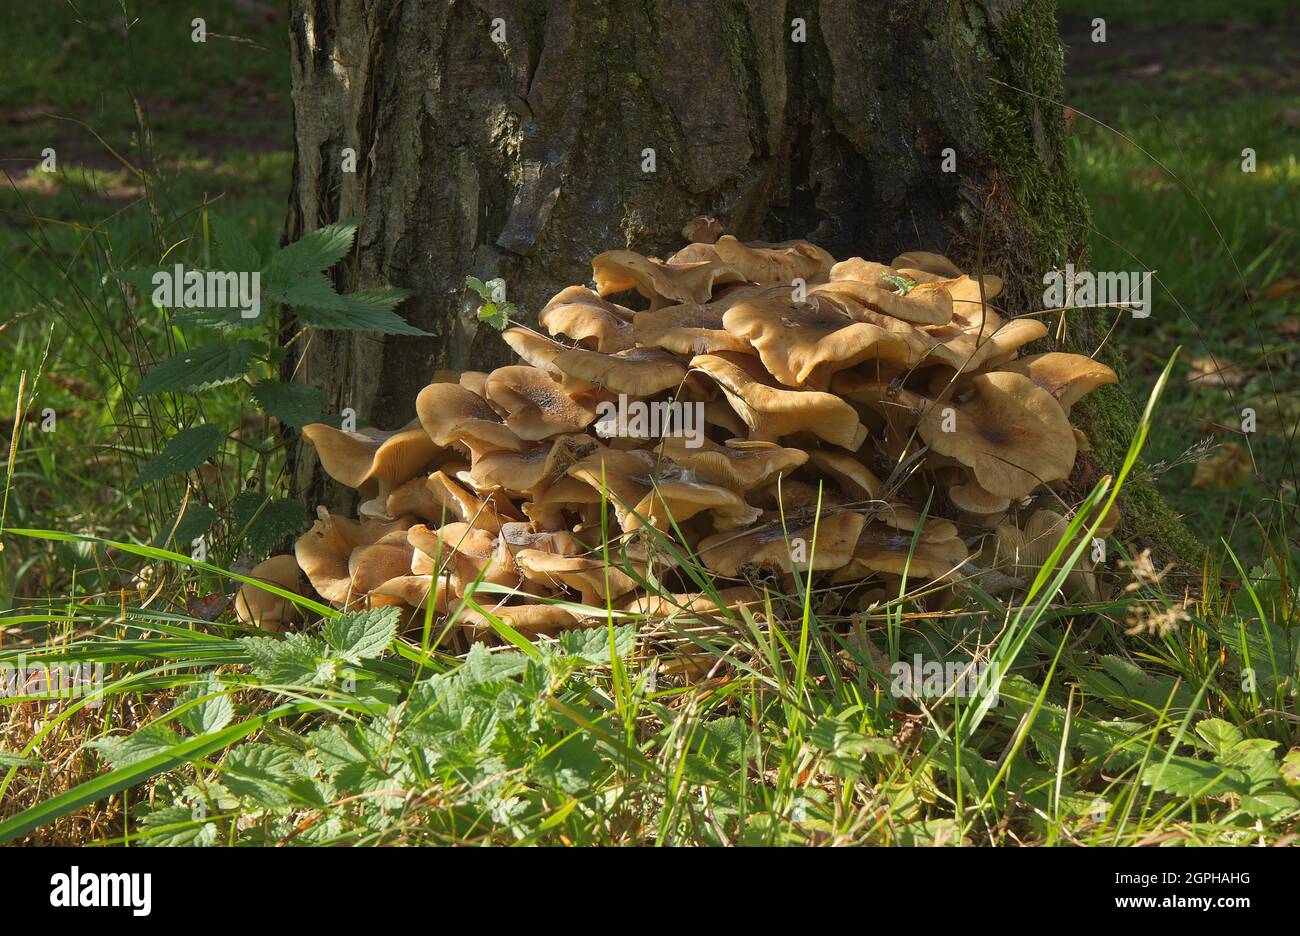 Armillaria mellea, also known as honey fungus, is a basidiomycete fungus in the genus Armillaria. After cooking, it is an edible mushroom. Stock Photo